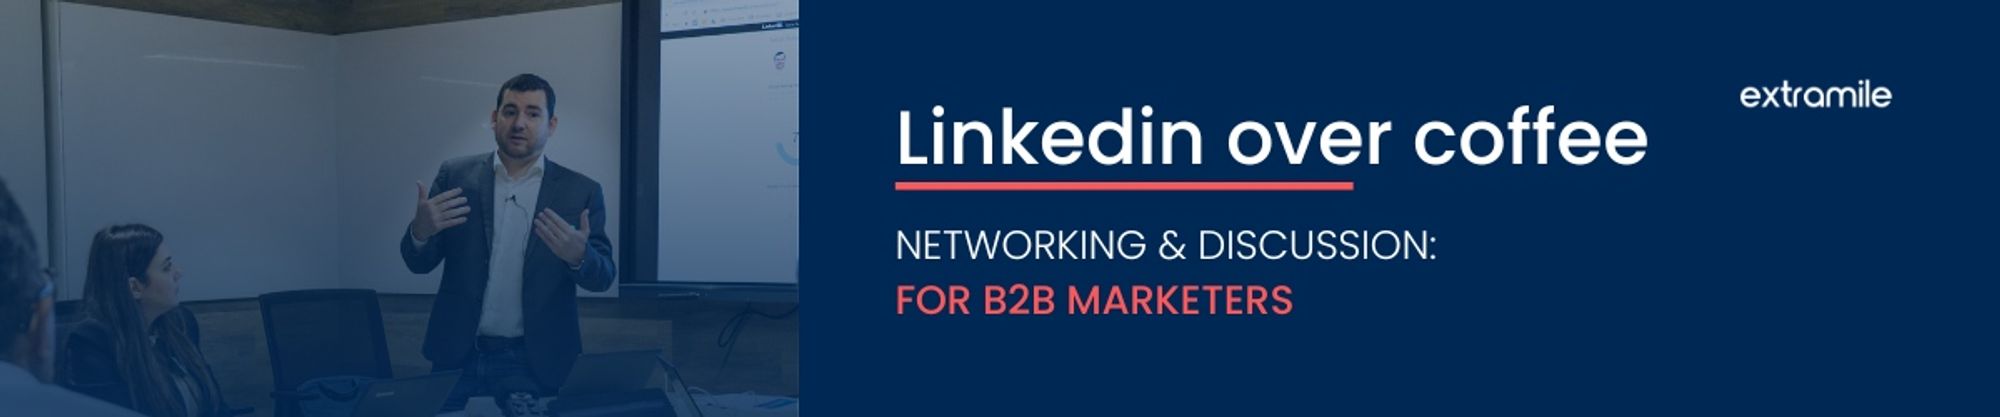 Linkedin over coffee | Networking & LinkedIn for B2B Marketers- December